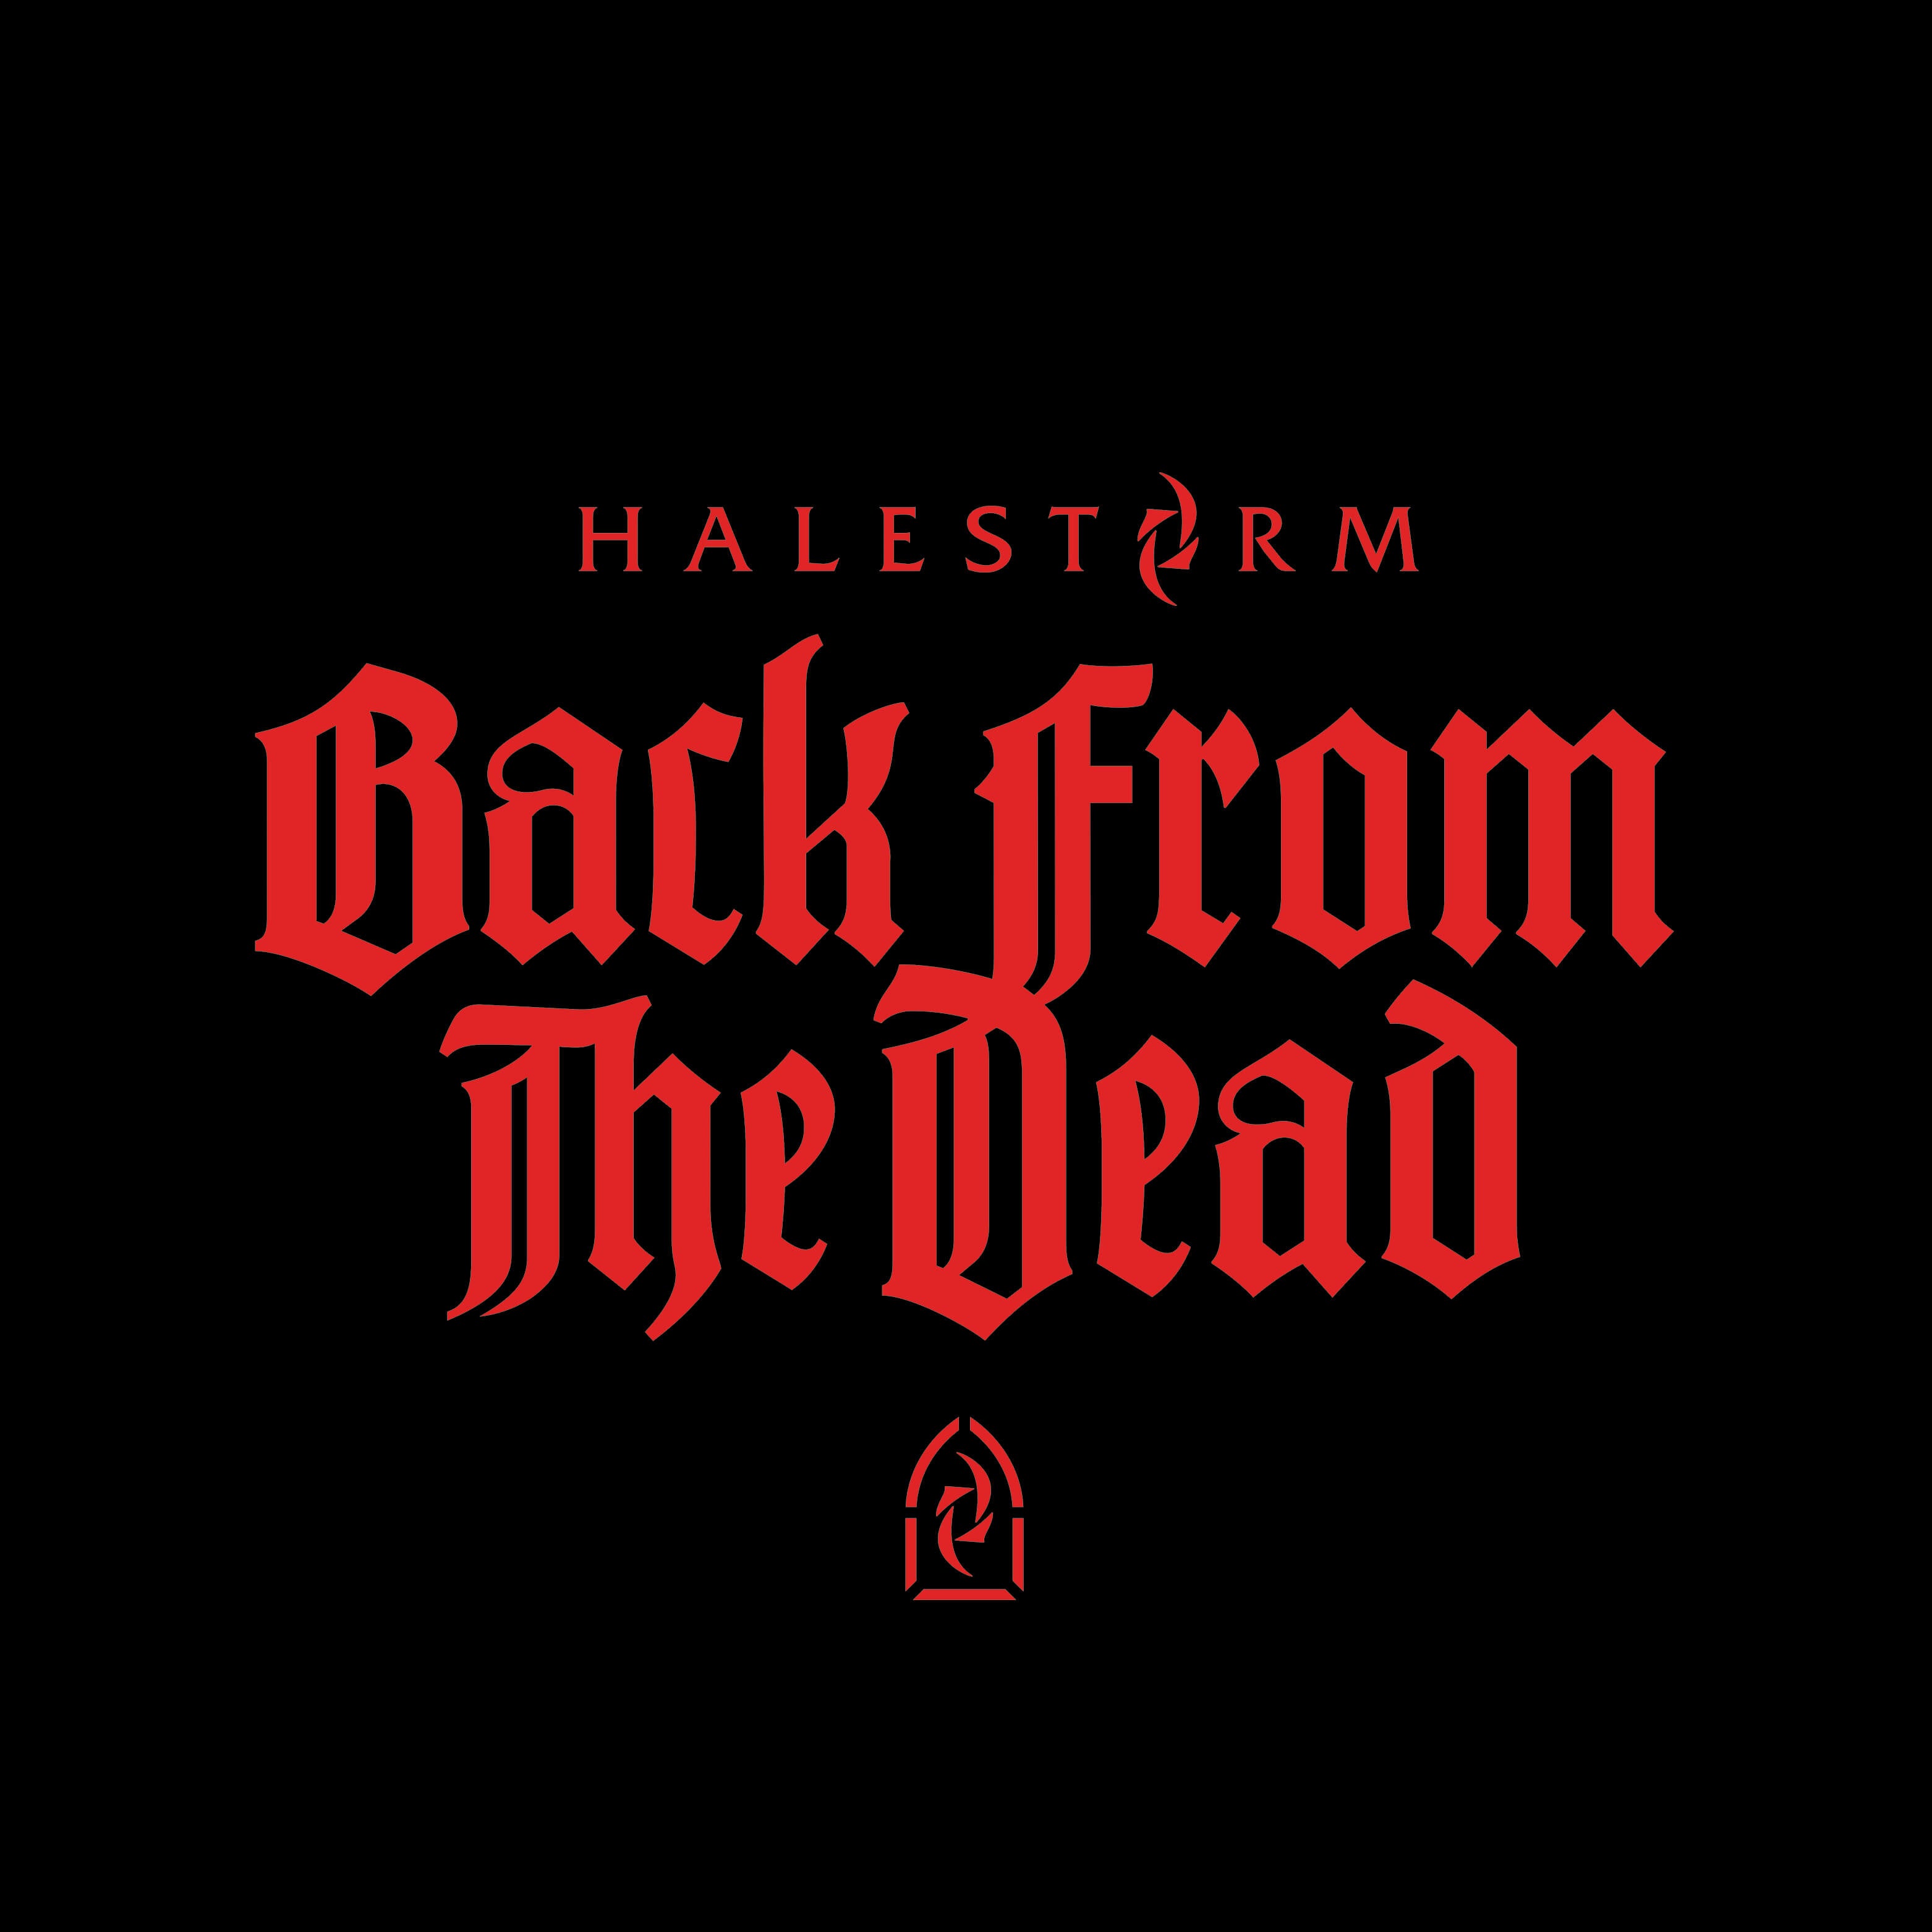 Halestorm - Back From The Dead T-Shirt